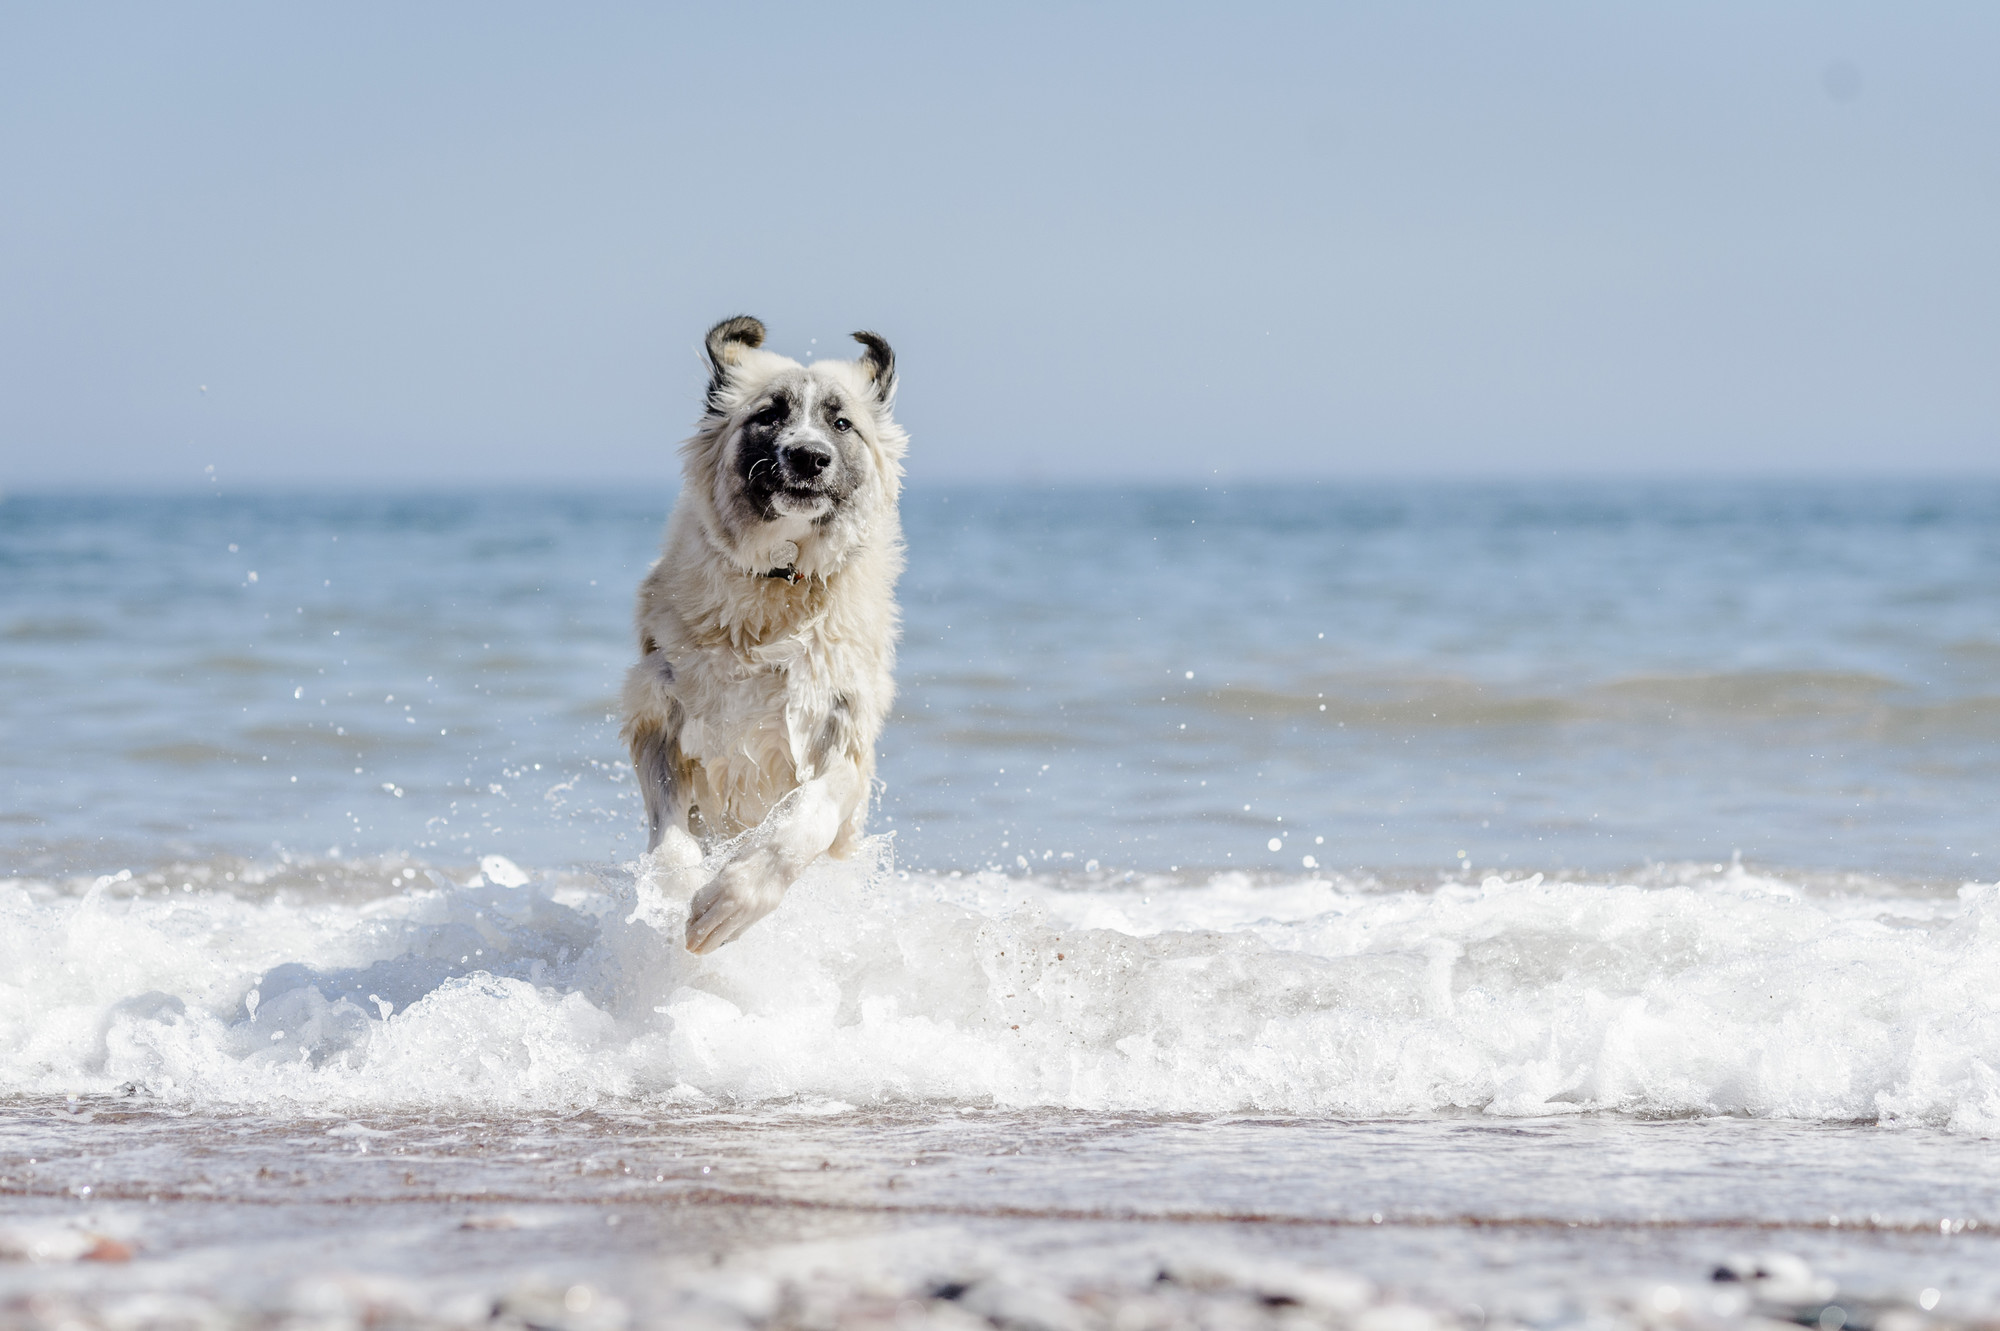 Dog running through the waves on the beach